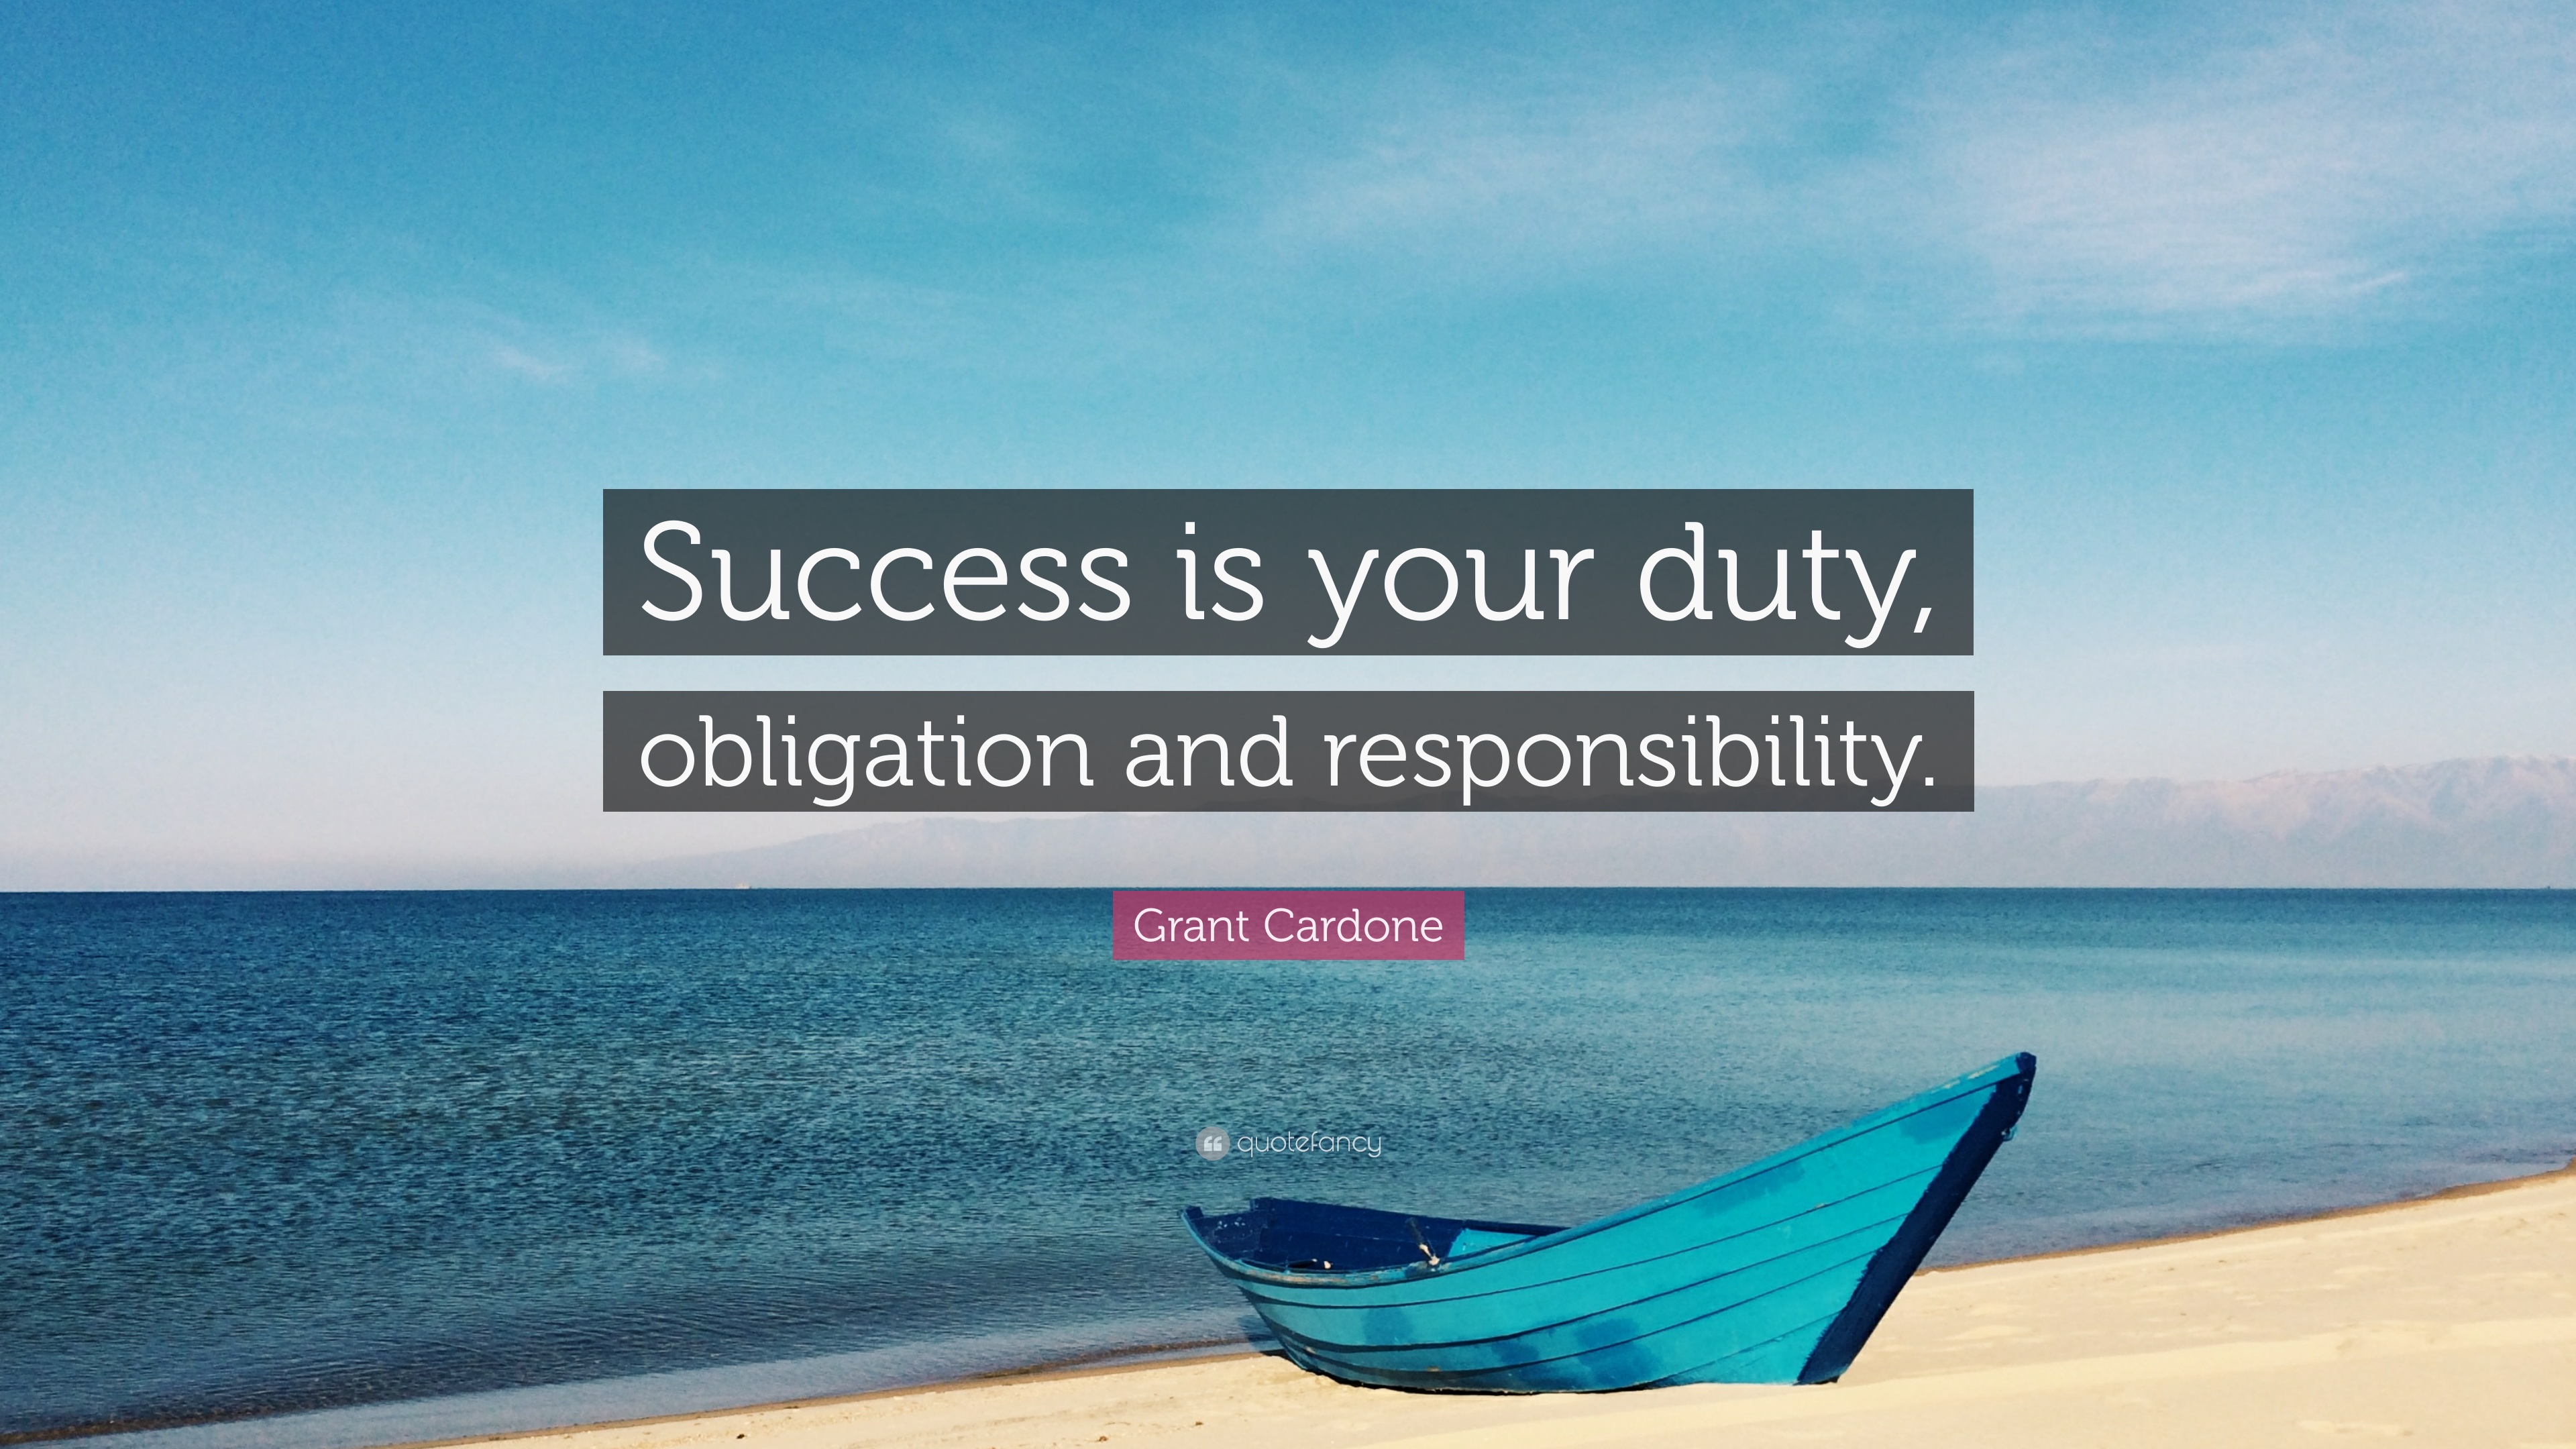 Grant Cardone Quote: “Success is your duty, obligation